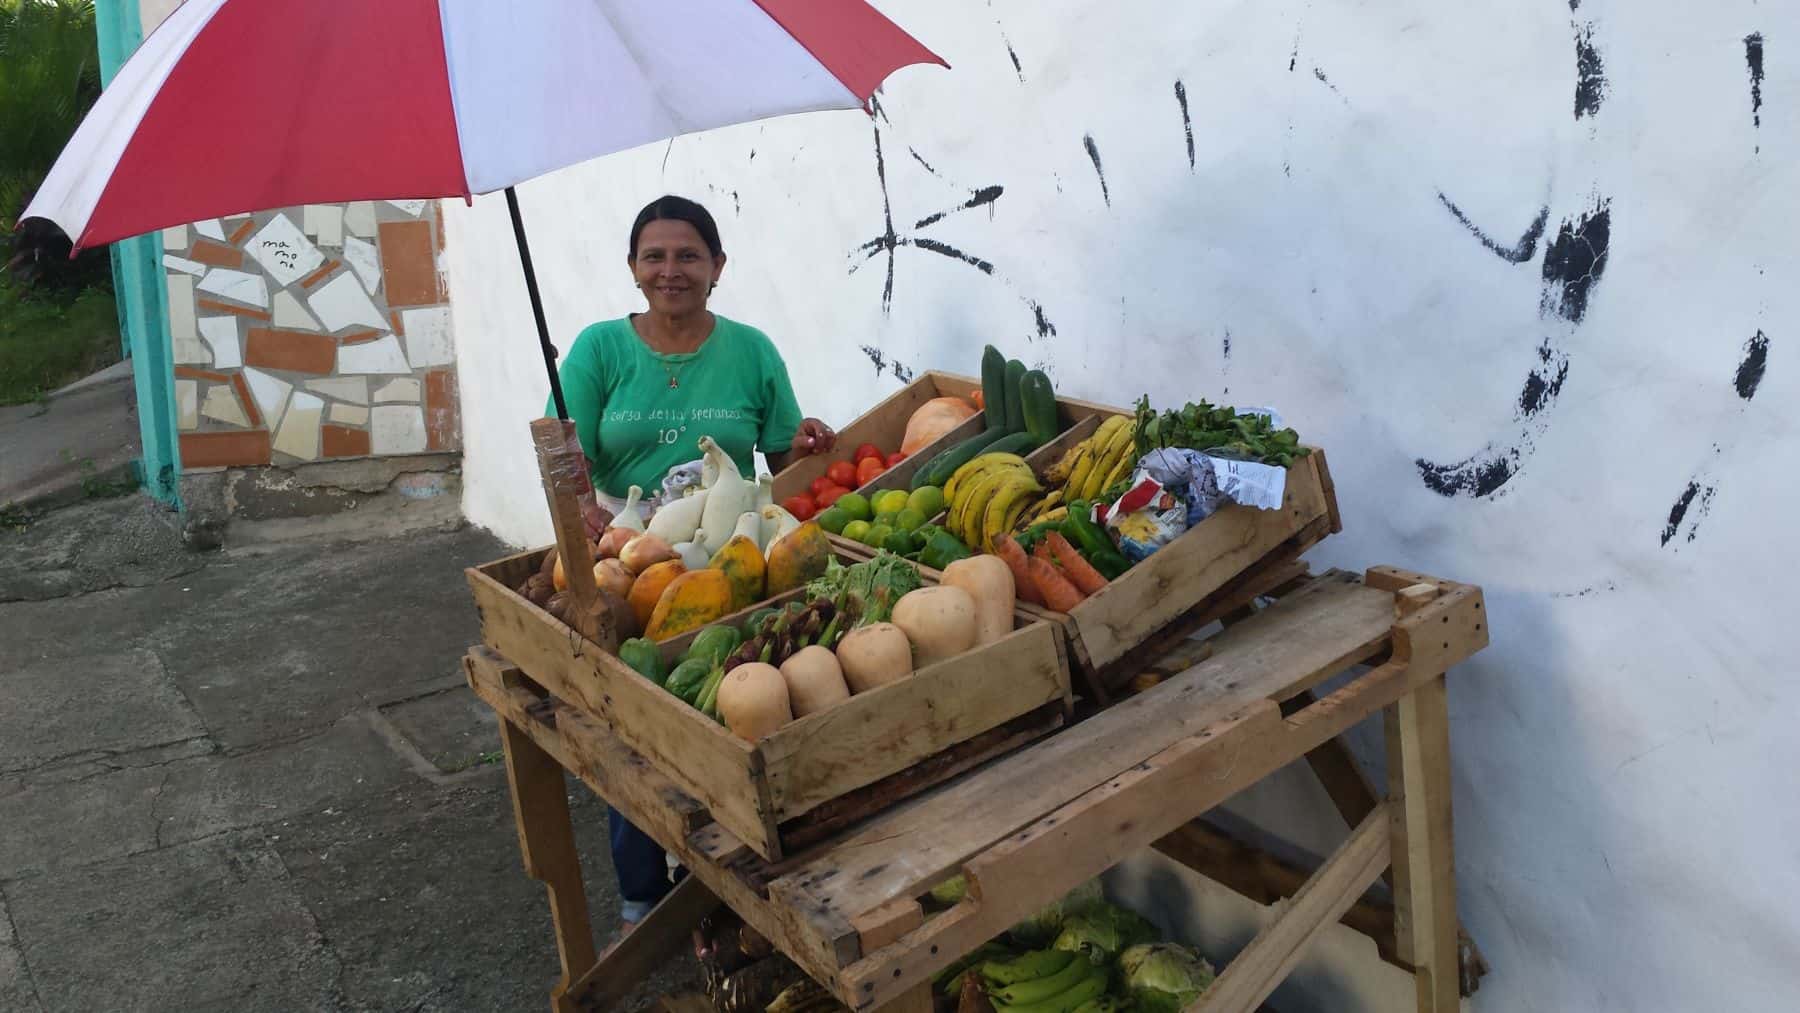 The fruit and vegetable business Mary started with the support of donors like you is changing her future after a lifetime of poverty. "I have several dreams. The first is to serve Jesus, who gave me a chance. And to you, beloved people of Canada, I have no words to express how grateful I am."